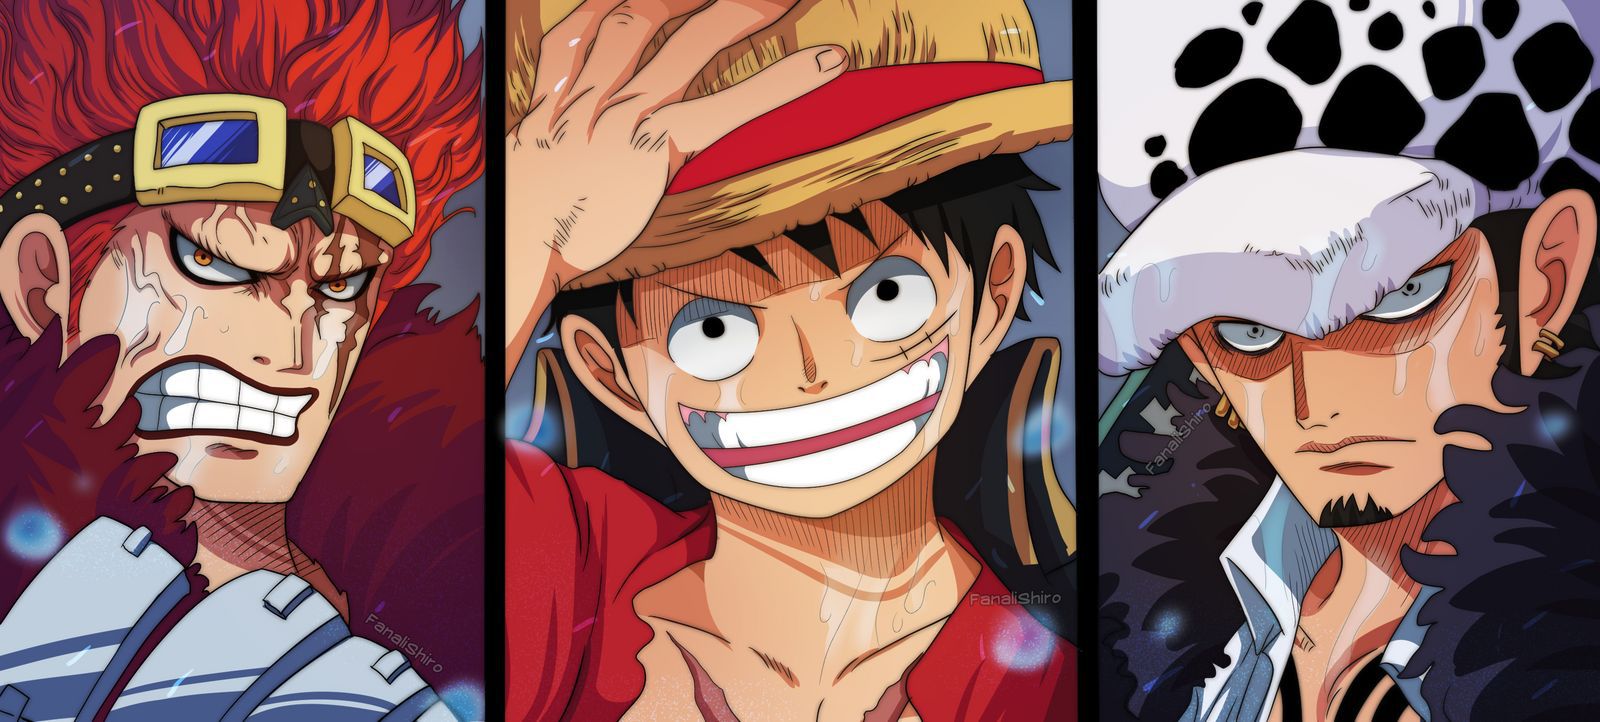 One Piece A Video Shows How Eiichiro Oda Designed The Cover Of Volume 97 Anime Sweet